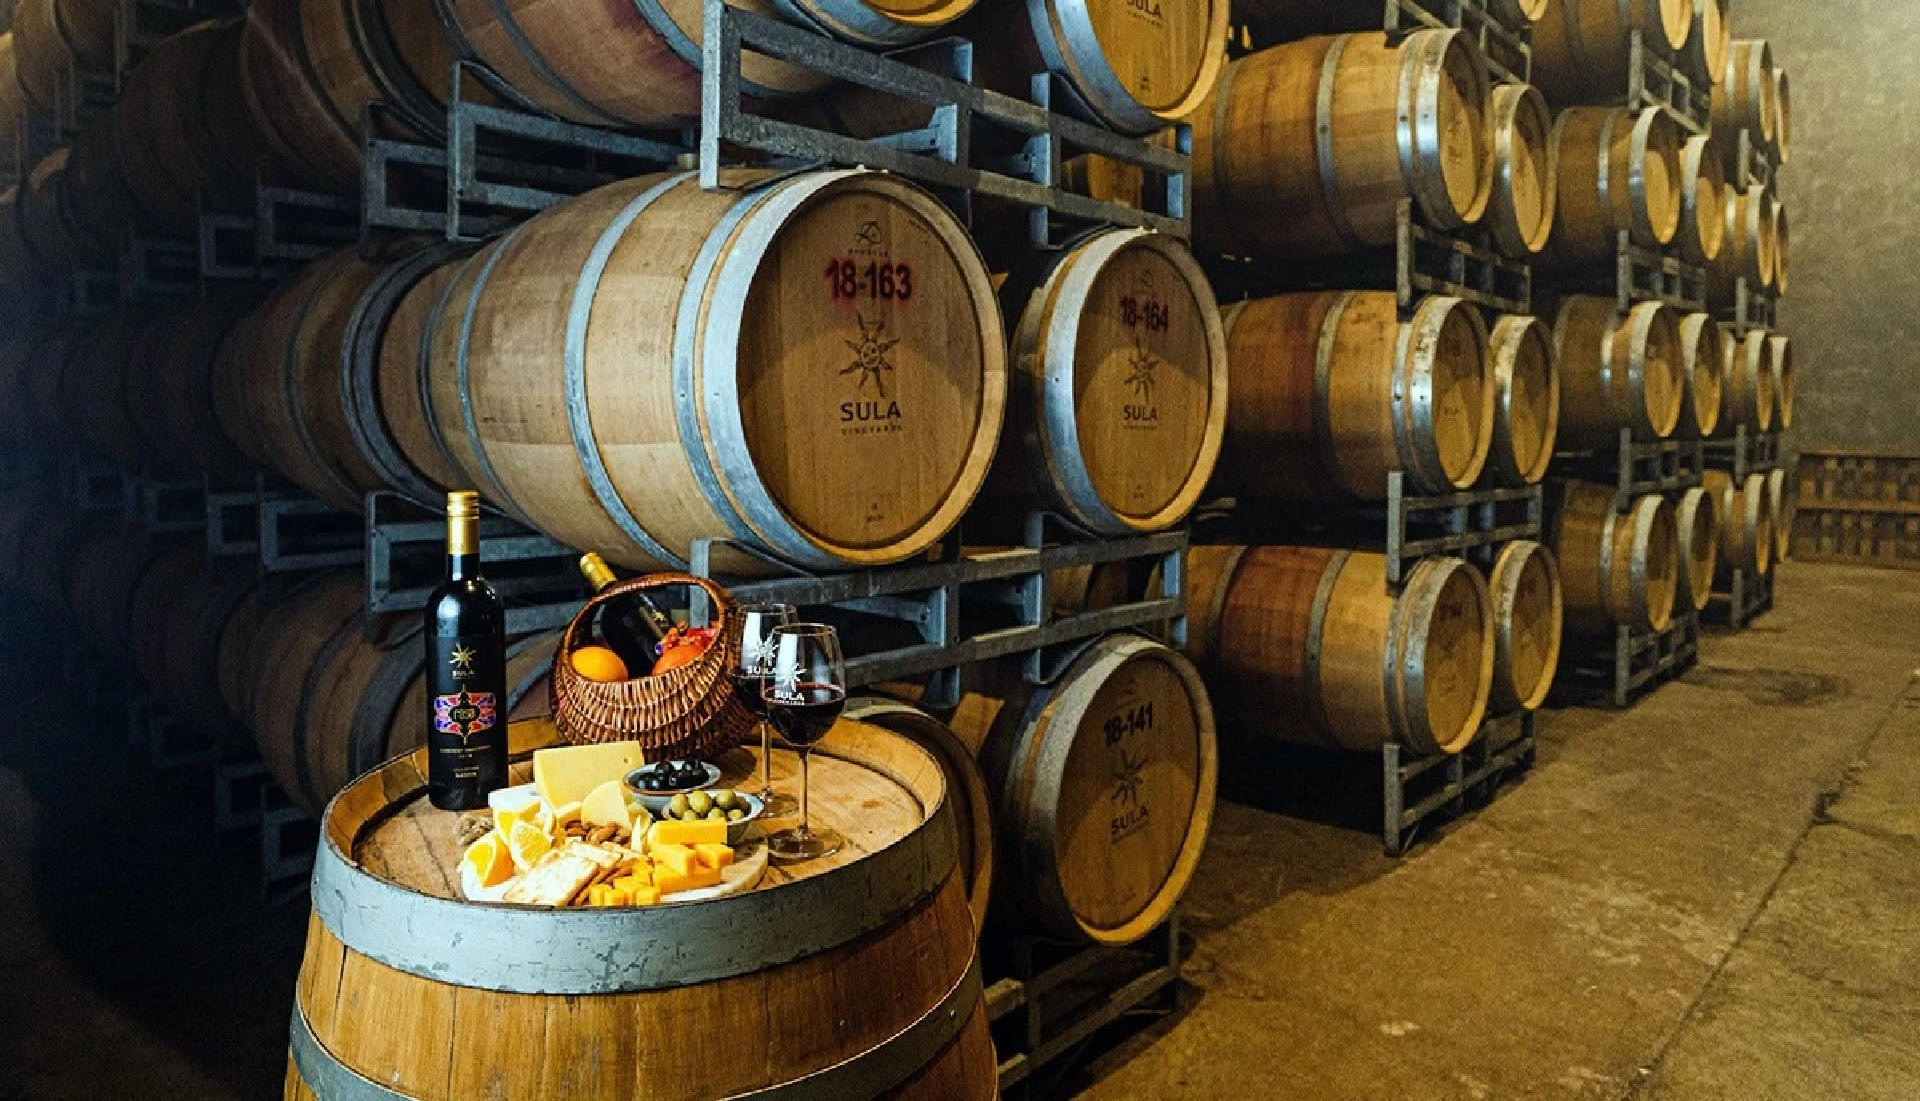 Sula’s award-winning wines in a unique wine tasting room.